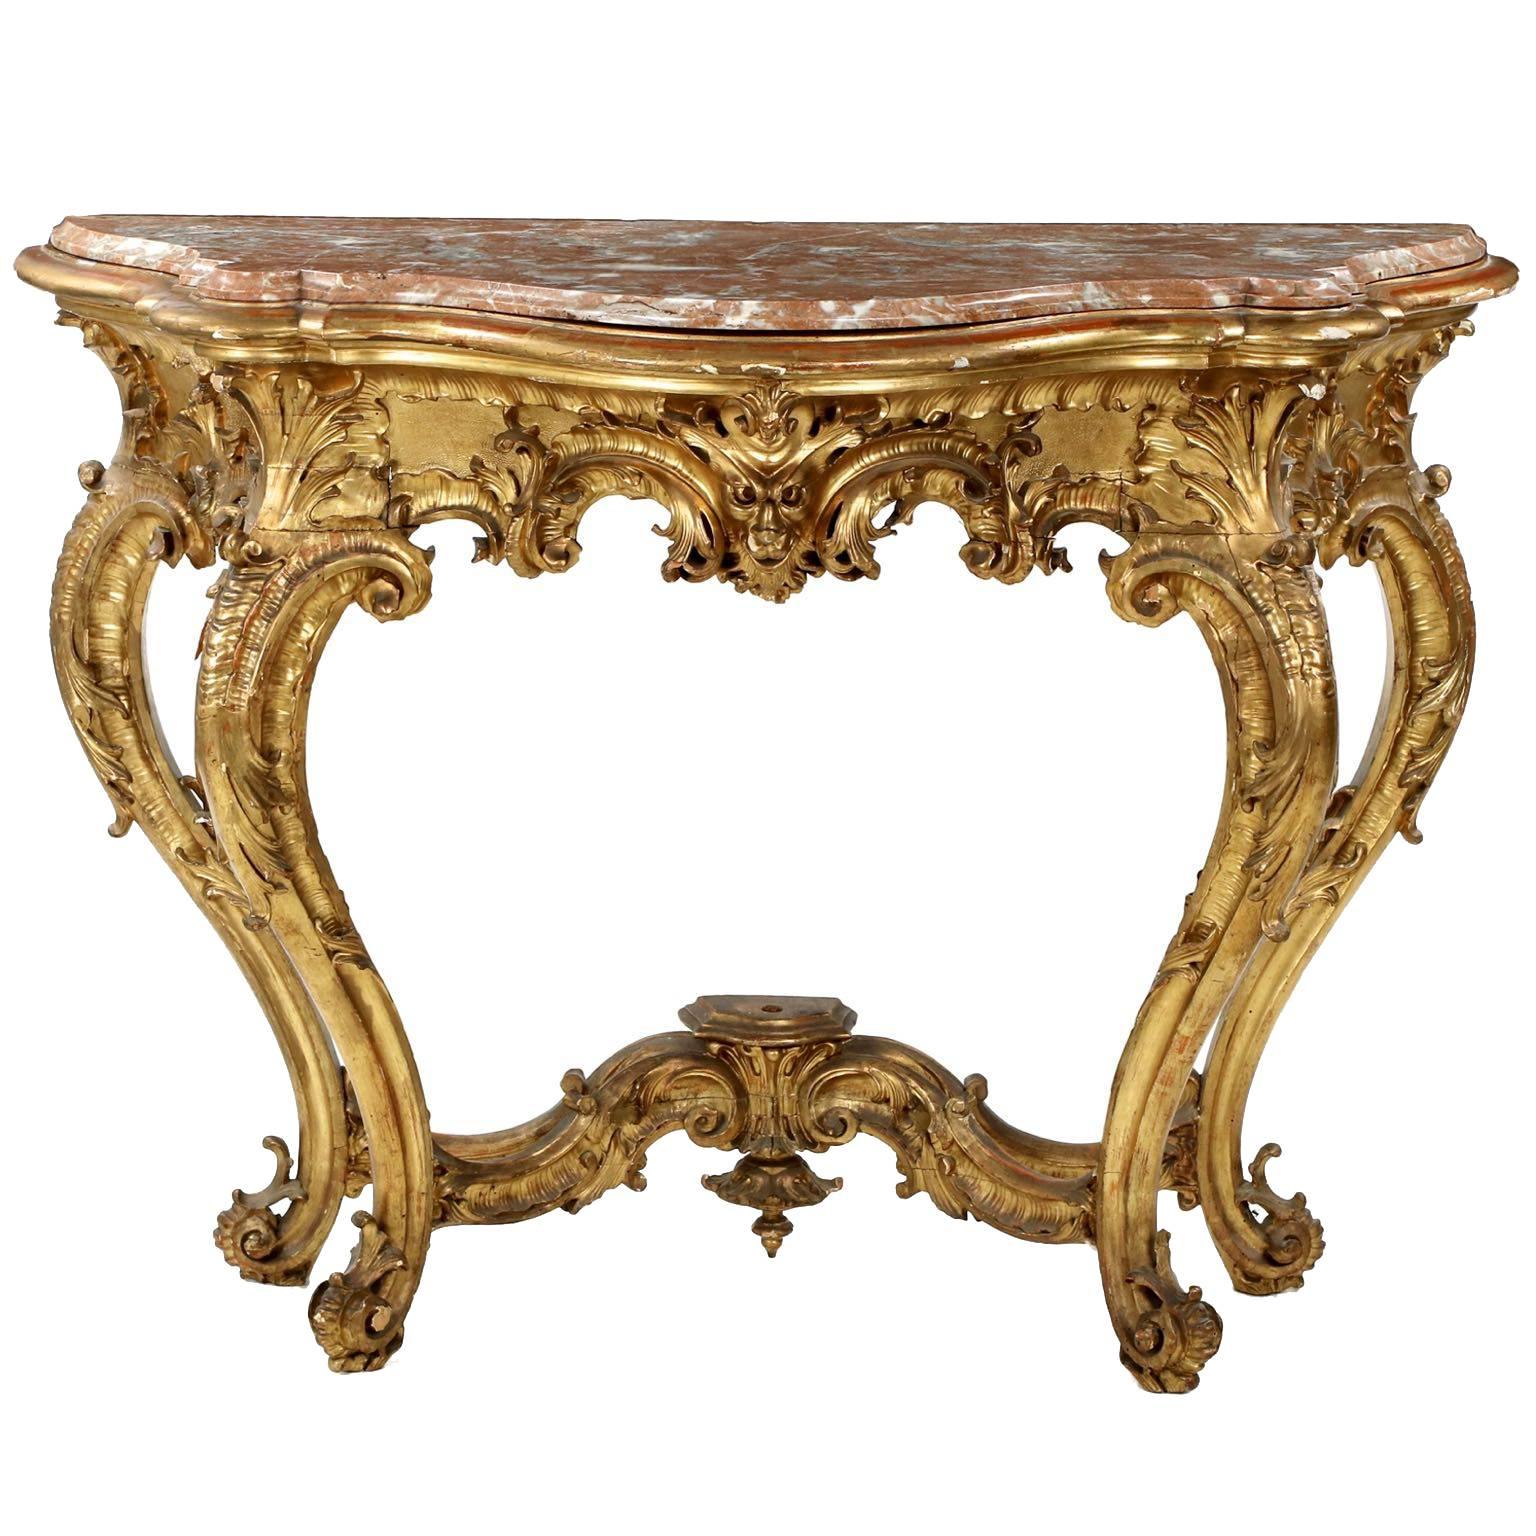 Carved Giltwood Red Marble-Top Console Table in Louis XV Taste, 19th Century